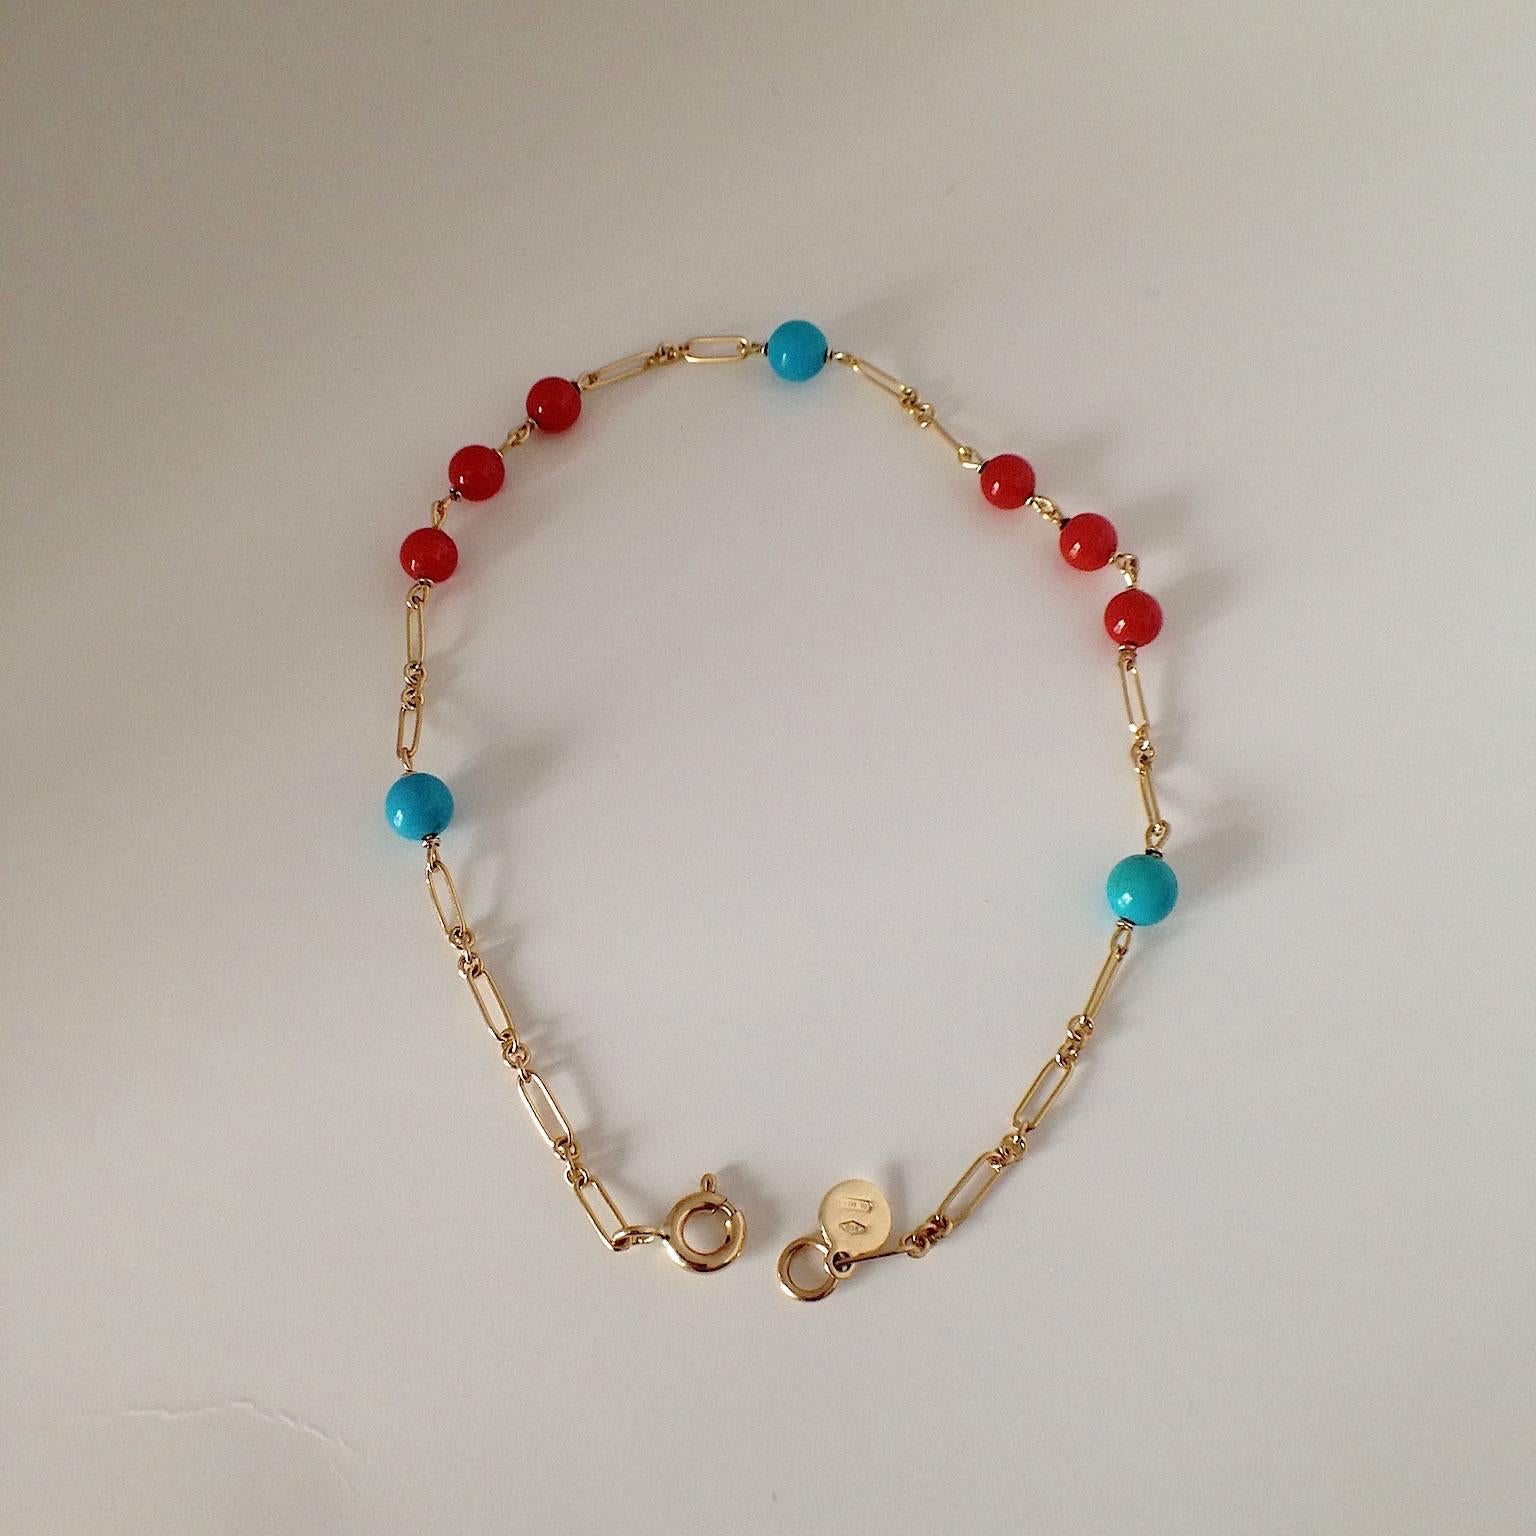 Women's Red Coral Turquoise Bead Handmade Gold Bracelet